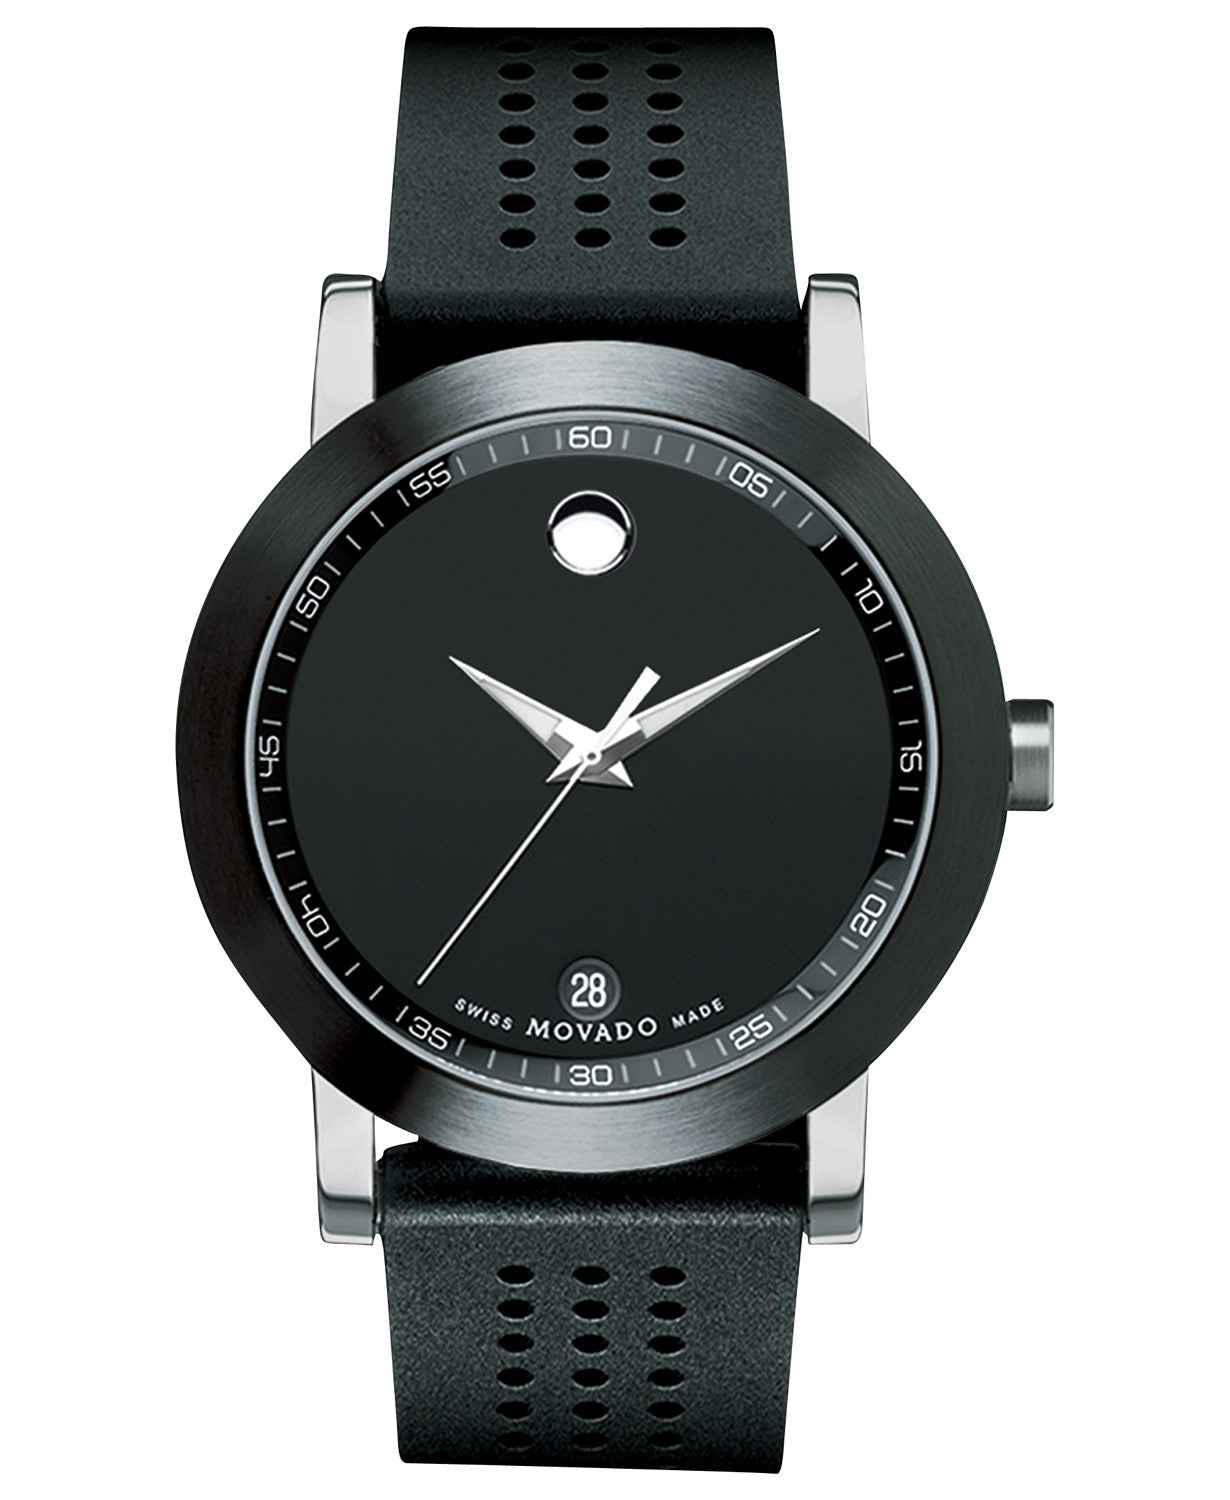 Movado Men's Museum Sport Black Perforated Rubber Strap Watch